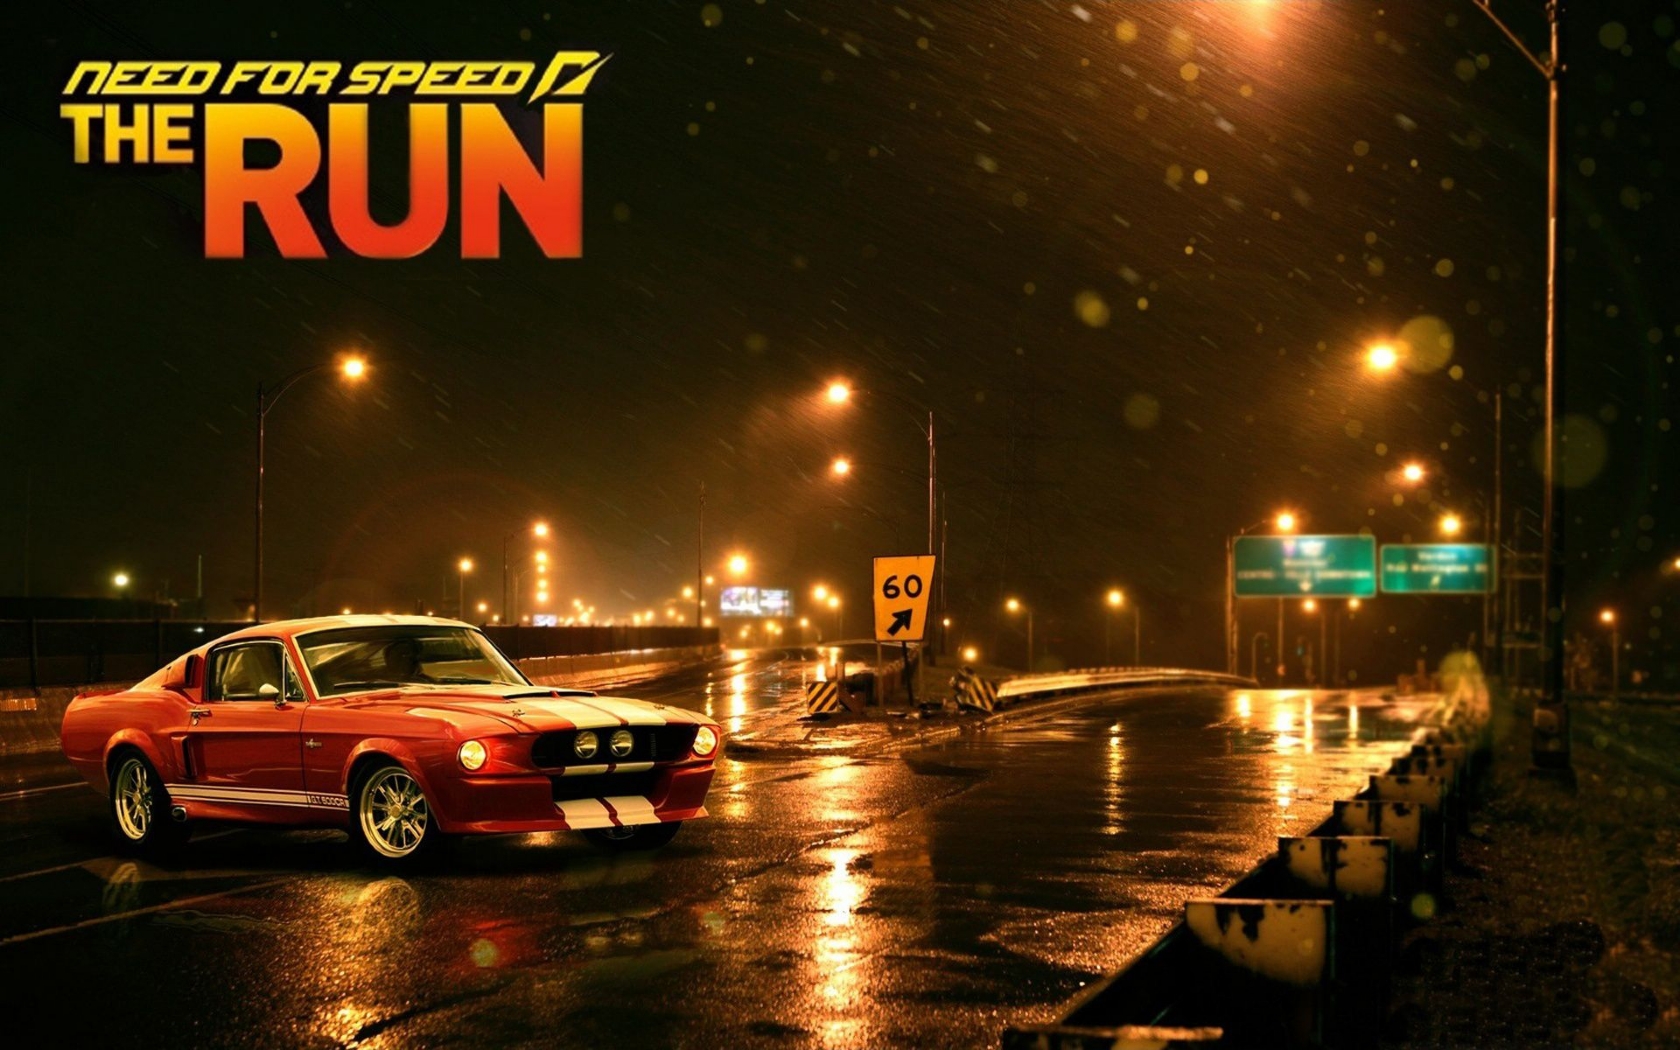 need for speed, video game, need for speed: the run